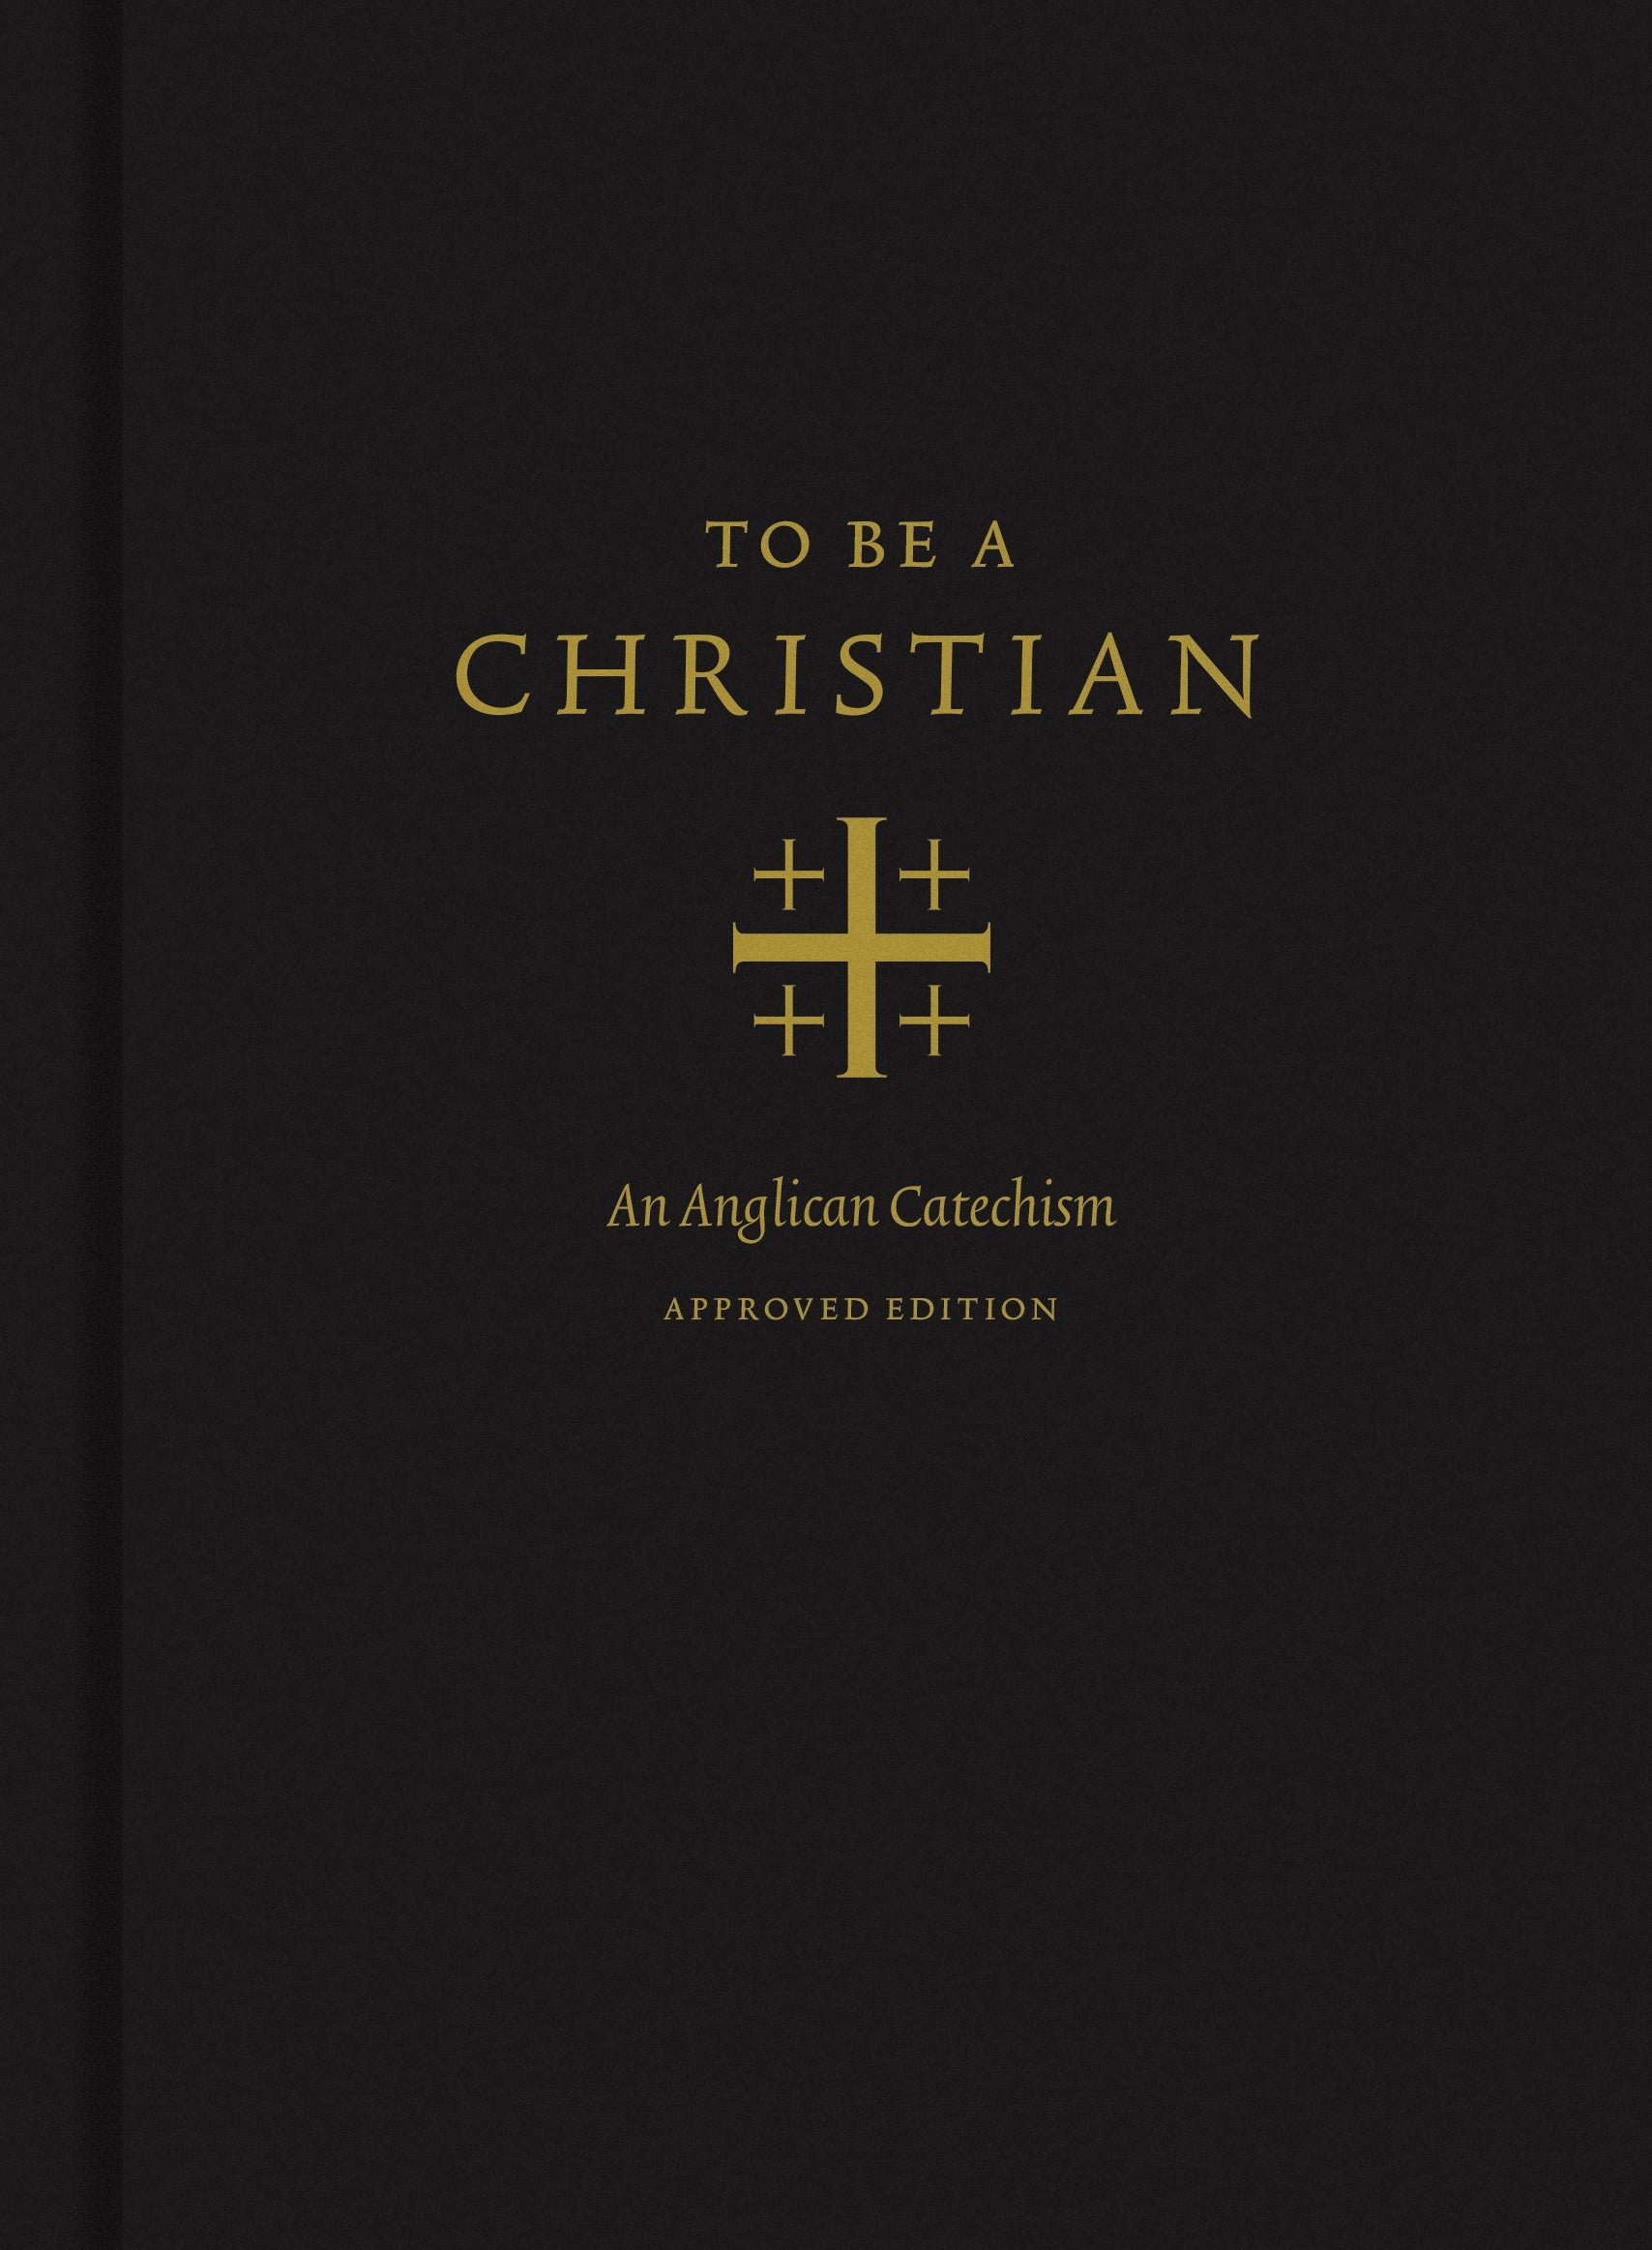 $20 - To Be A Christian (Catechism)